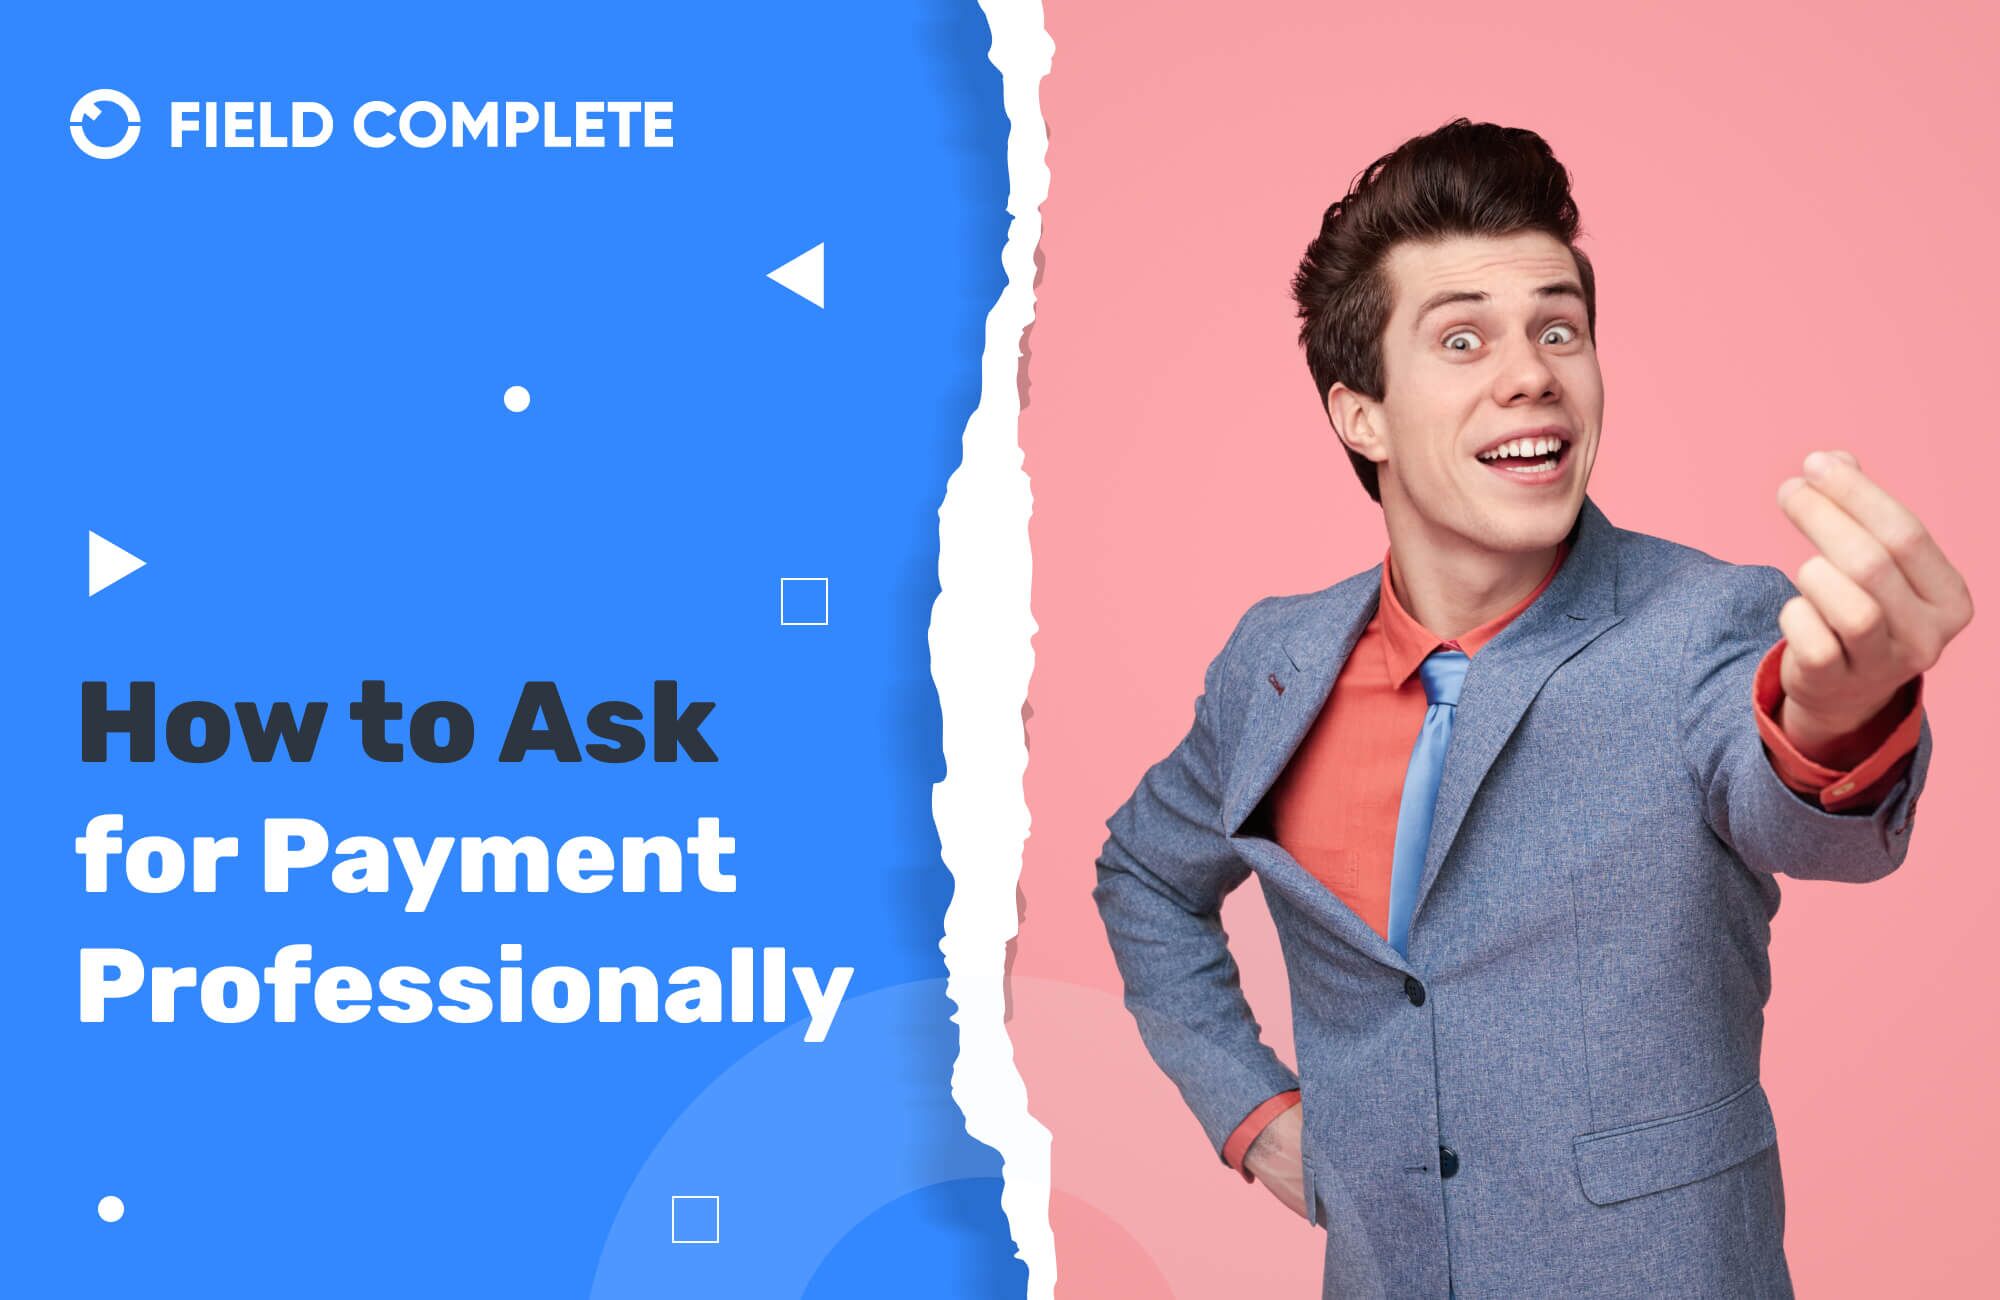 How to Ask for Payment Professionally